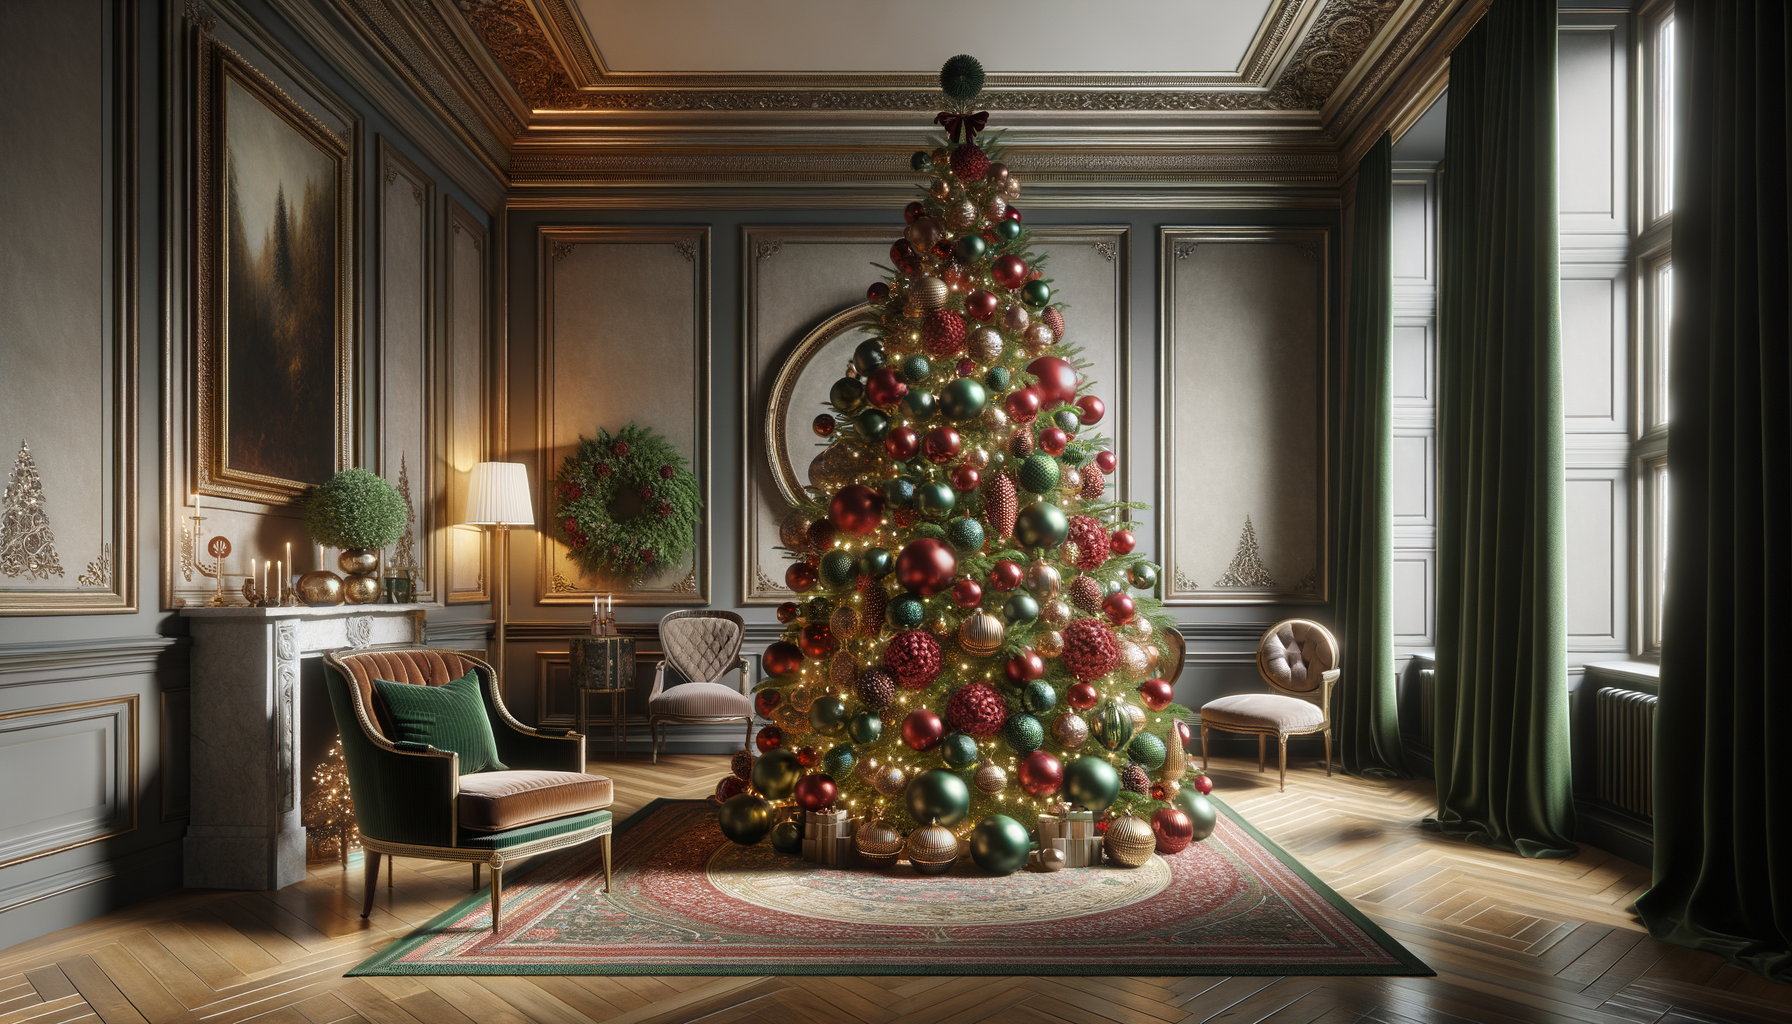 Living room with a vintage-colored ornaments.